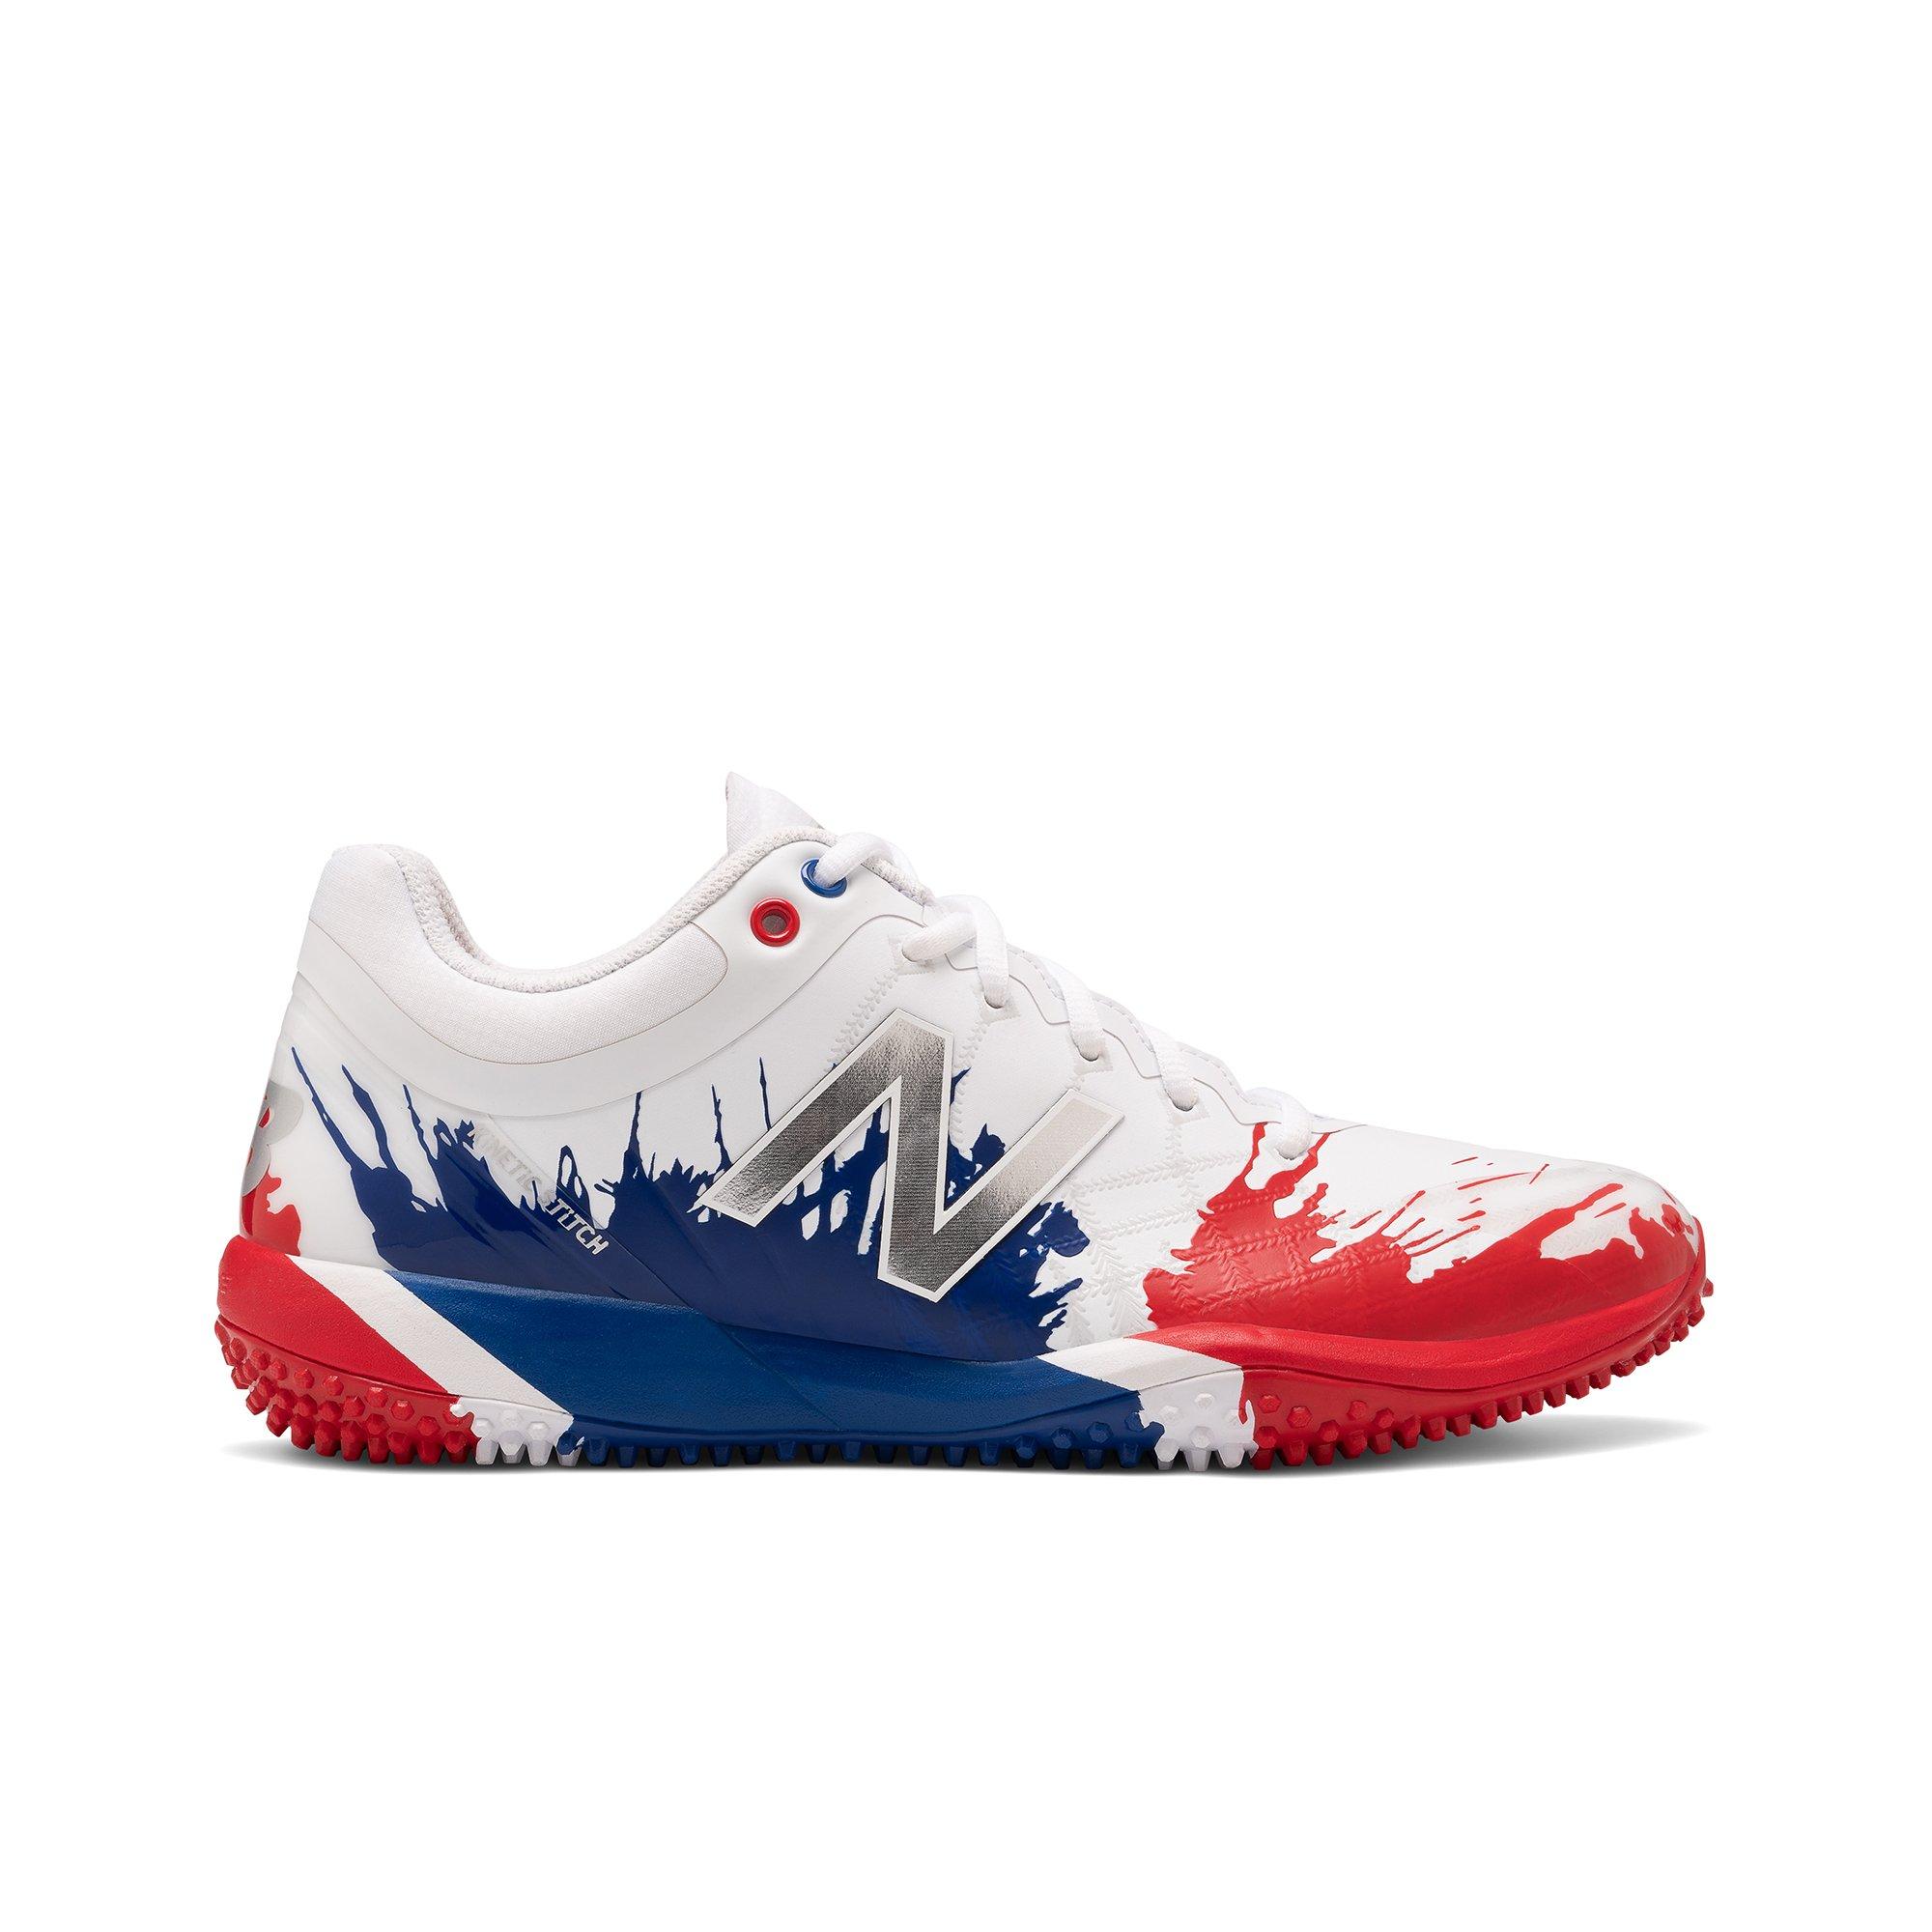 active new balance turf shoes cheap online